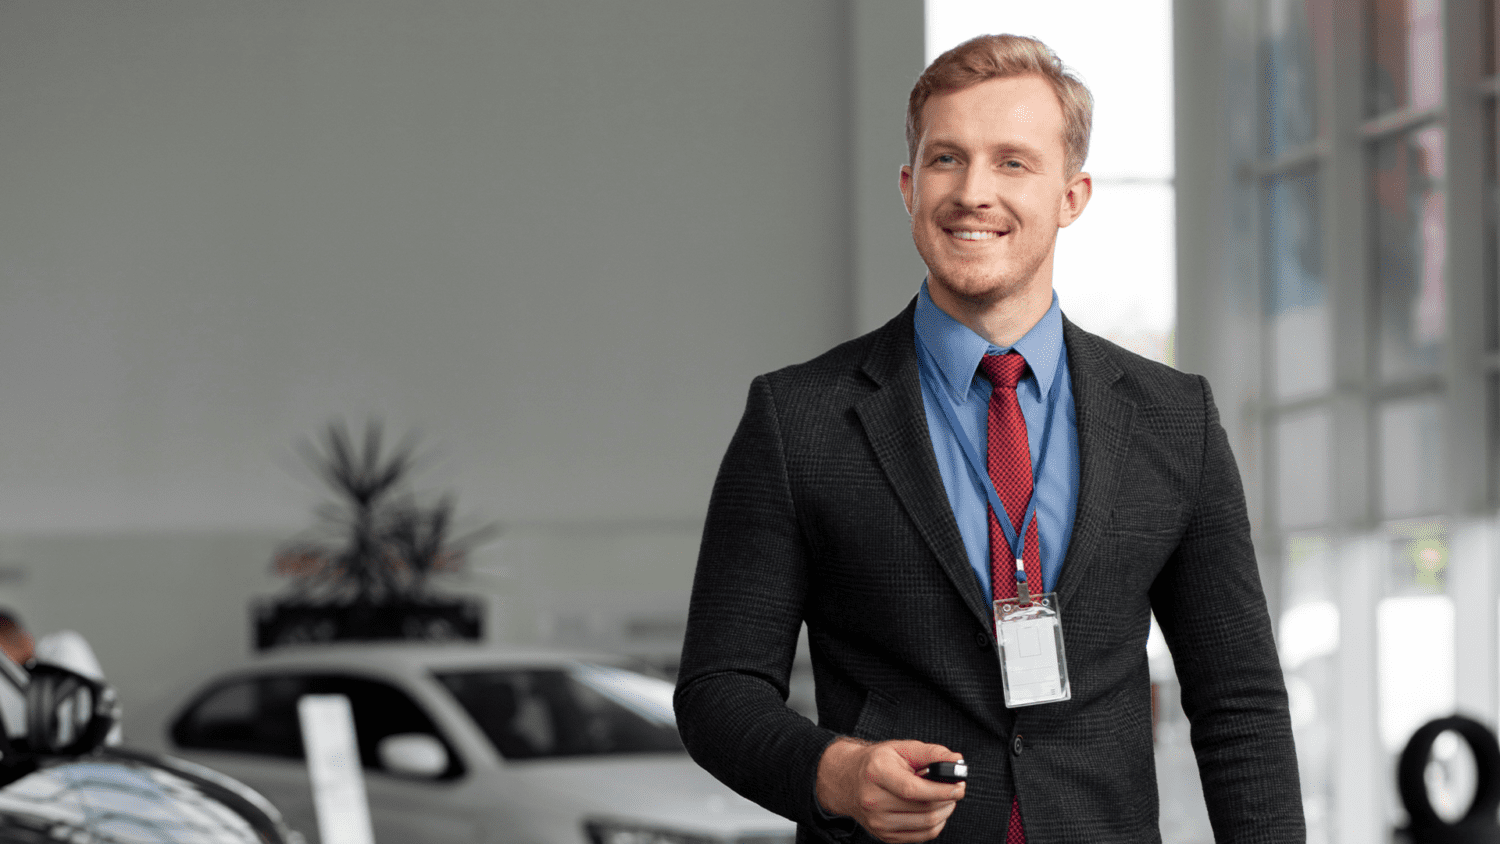 A dealership evaluation is a preventive exercise that allows you to analyze the areas of improvement and the good practices of your dealership.